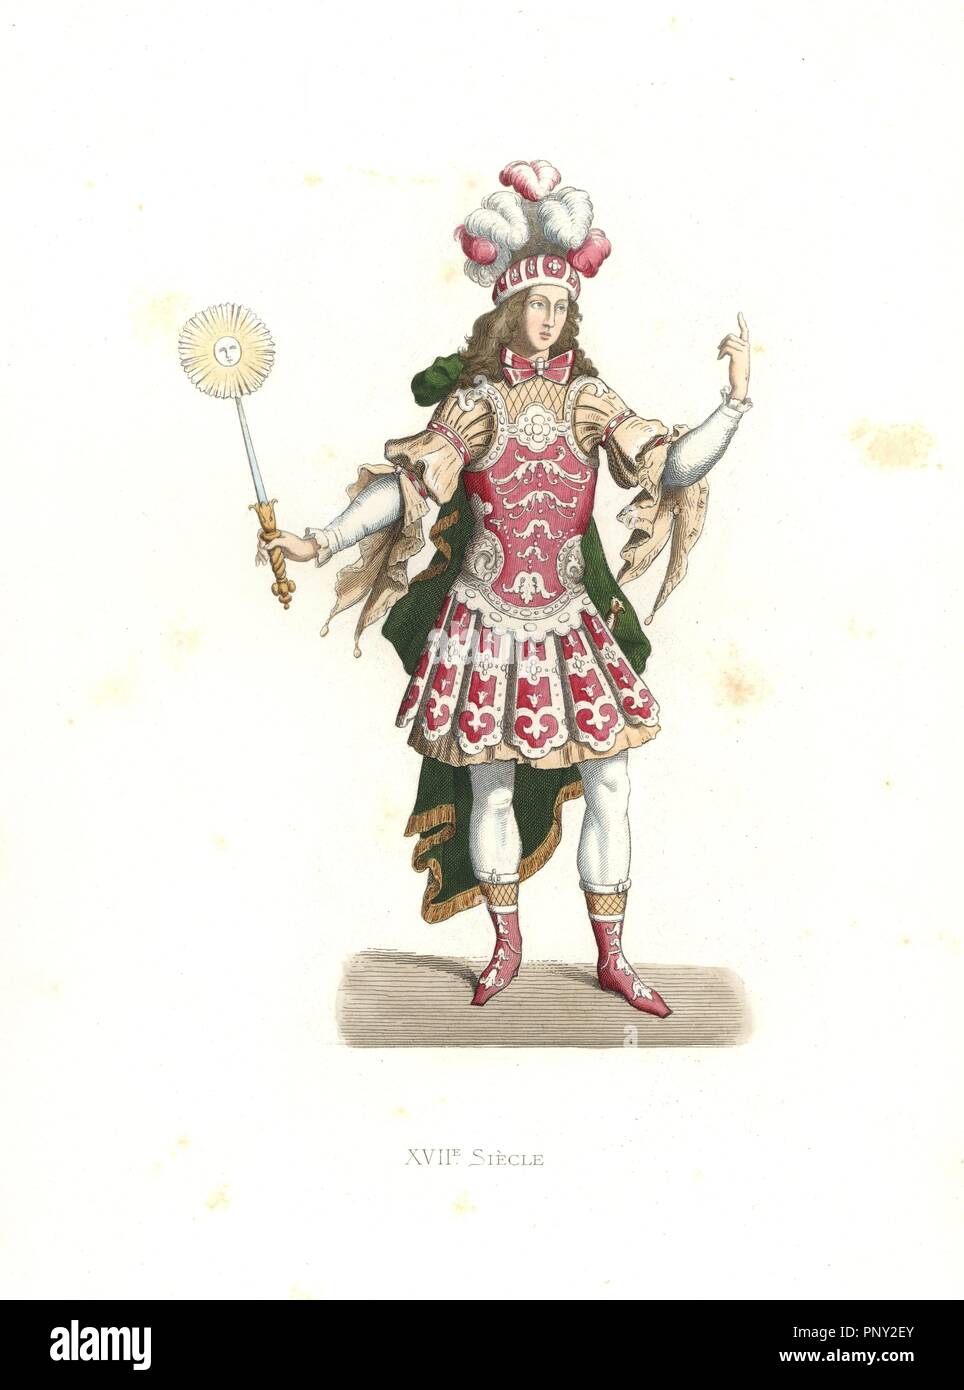 Louis XIV, the Sun King, in ballet costume, 17th century. Handcolored illustration by E. Lechevallier-Chevignard, lithographed by A. Didier, L. Flameng, F. Laguillermie, from Georges Duplessis's 'Costumes historiques des XVIe, XVIIe et XVIIIe siecles' (Historical costumes of the 16th, 17th and 18th centuries), Paris 1867. The book was a continuation of the series on the costumes of the 12th to 15th centuries published by Camille Bonnard and Paul Mercuri from 1830. Georges Duplessis (1834-1899) was curator of the Prints department at the Bibliotheque nationale. Edmond Lechevallier-Chevignard (1 Stock Photo